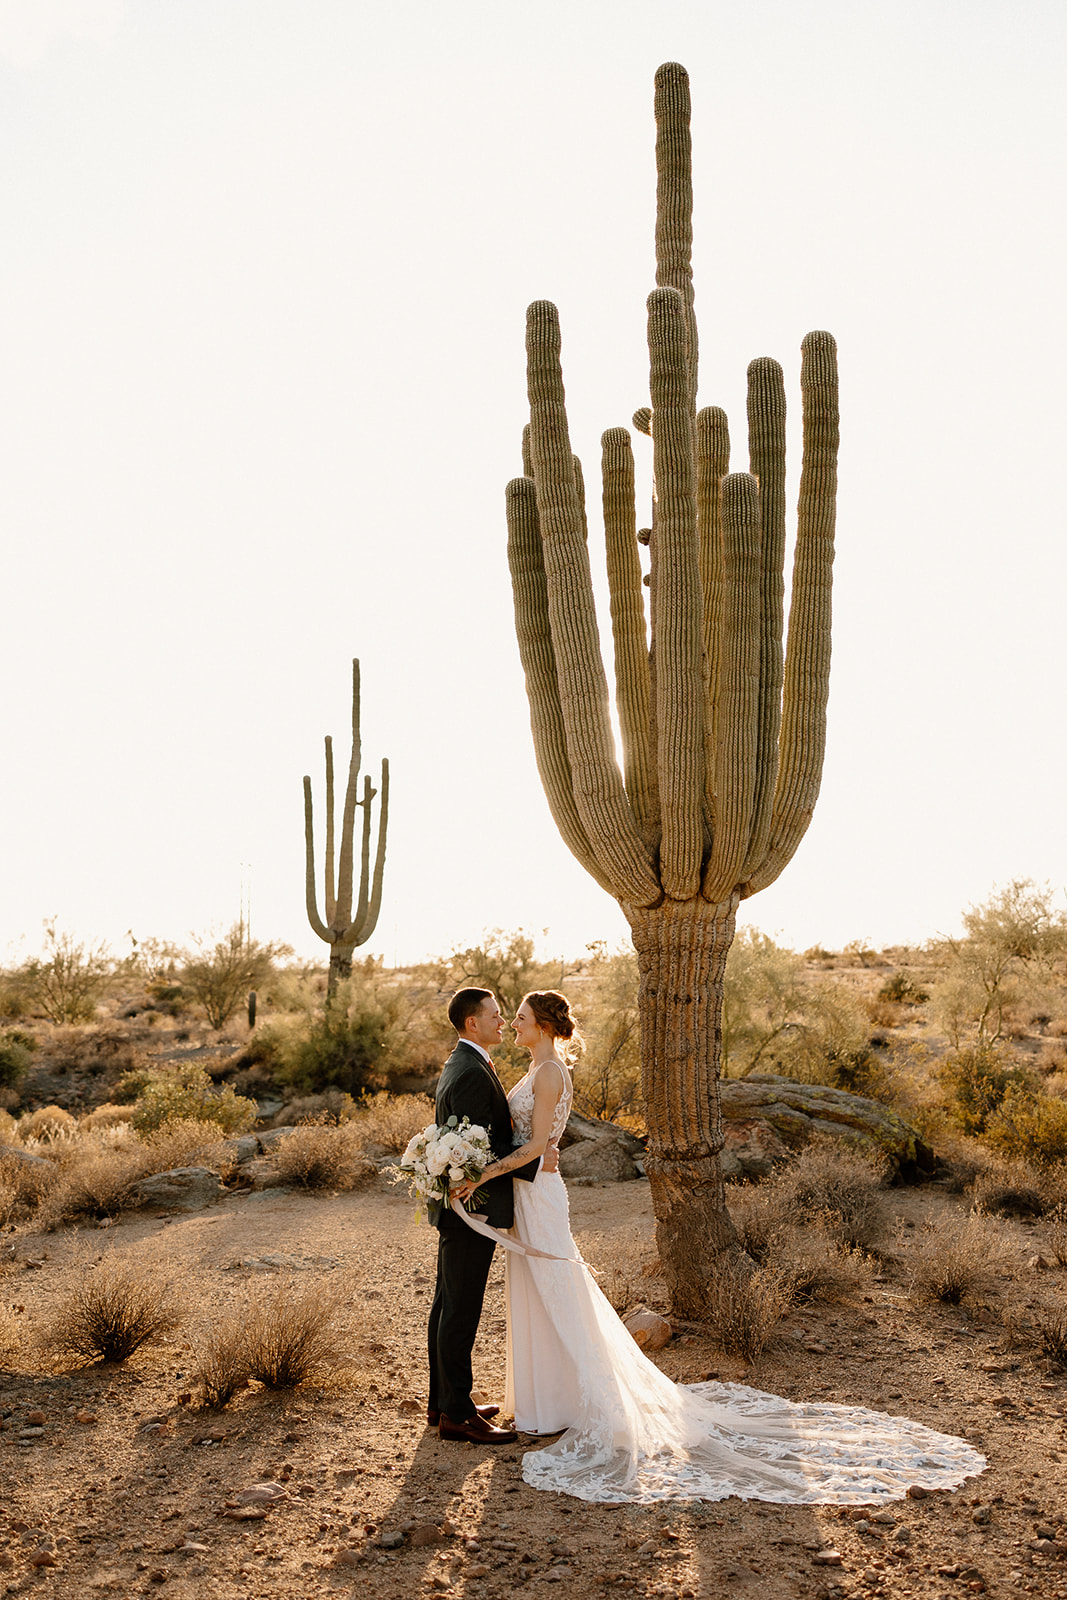 Stunning bride and groom pose in the desert after their stunning Arizona wedding